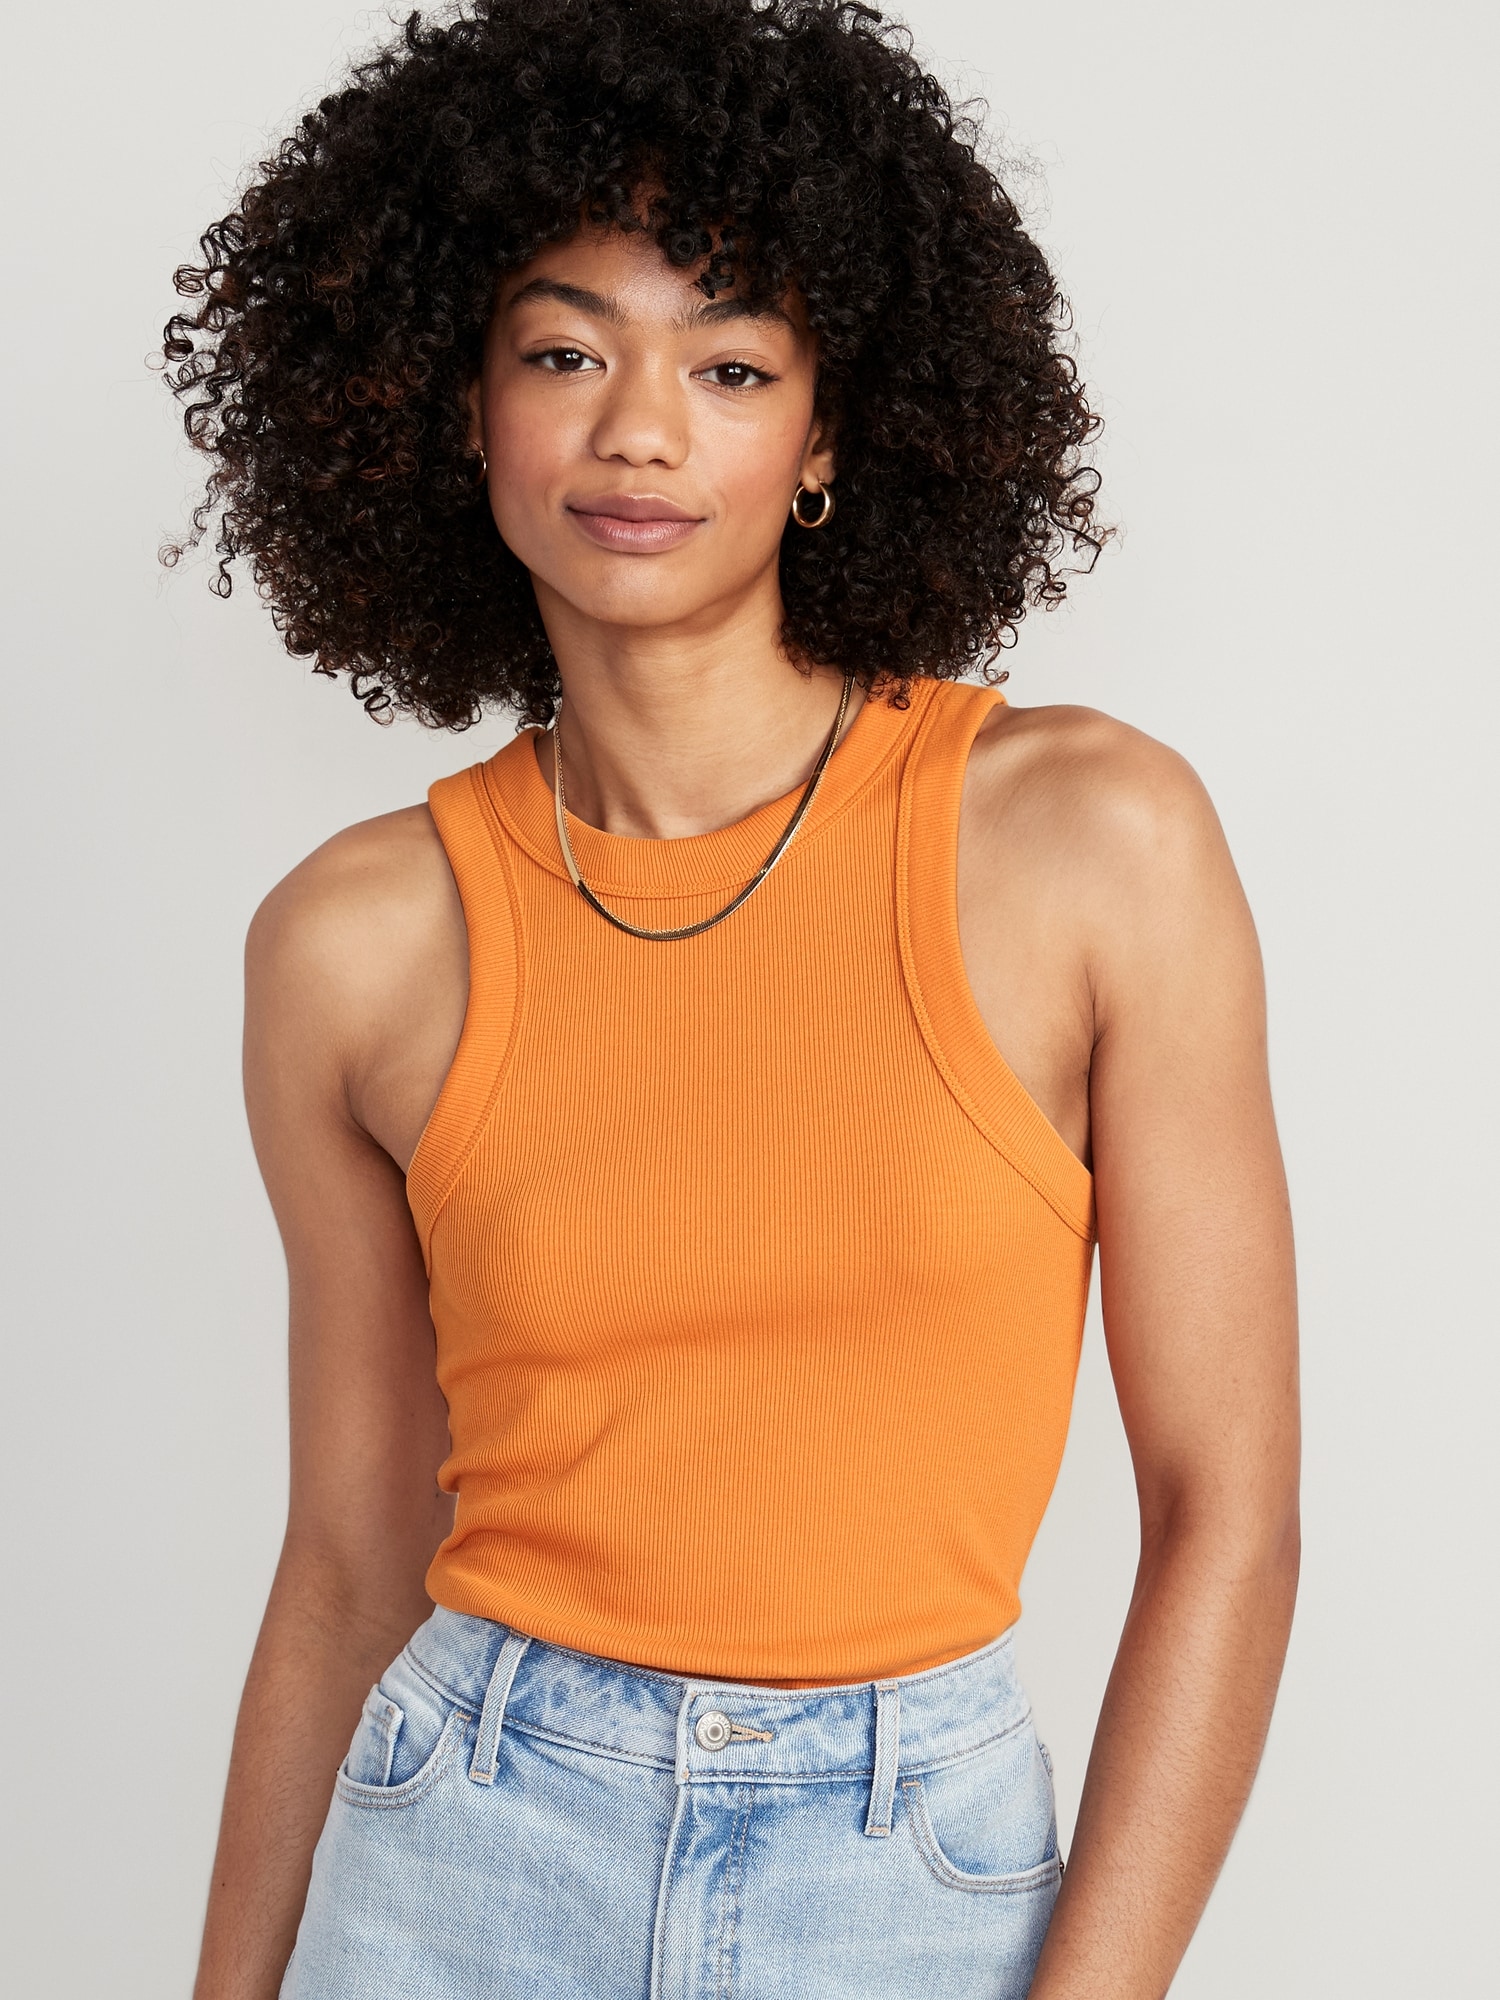 Fitted Rib-Knit Tank Top, Old Navy